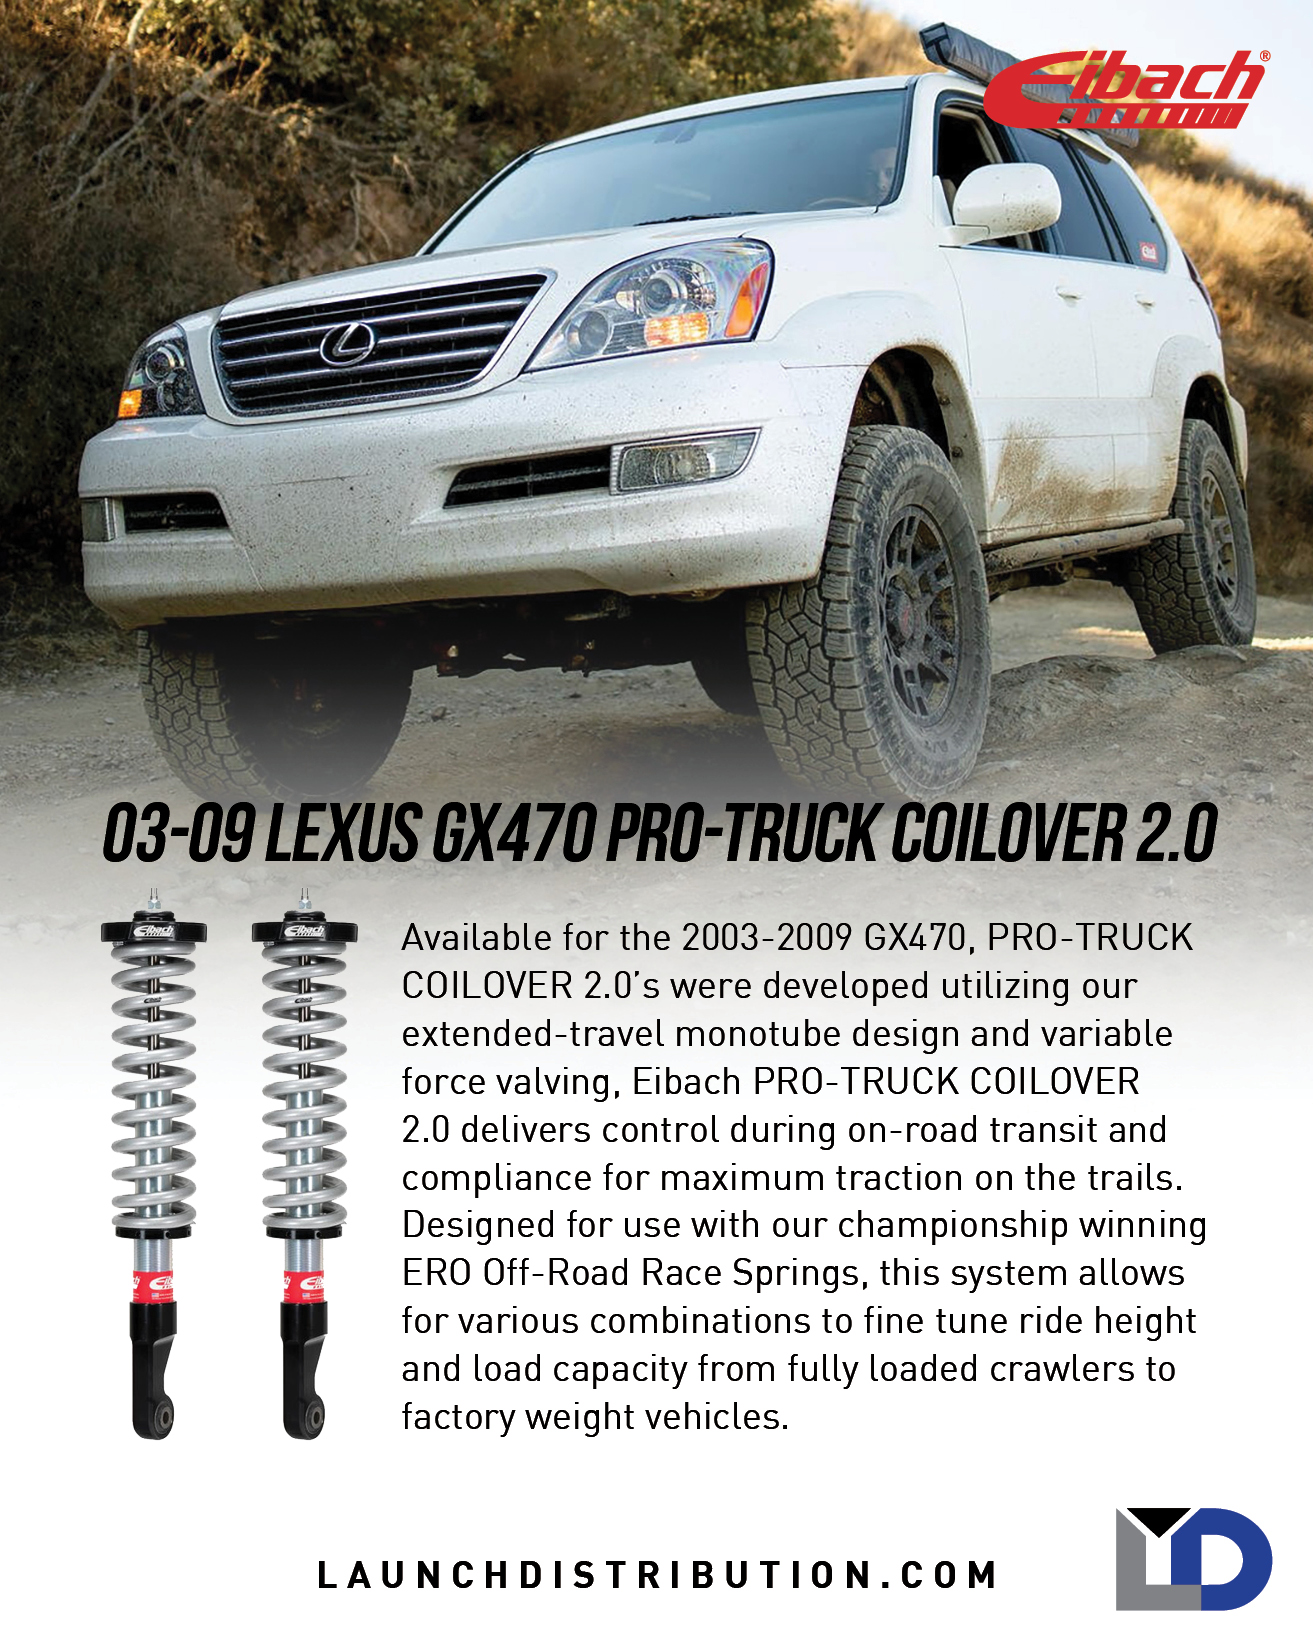 Eibach Lexus GX PRO-TRUCK Coilover 2.0 Now Available